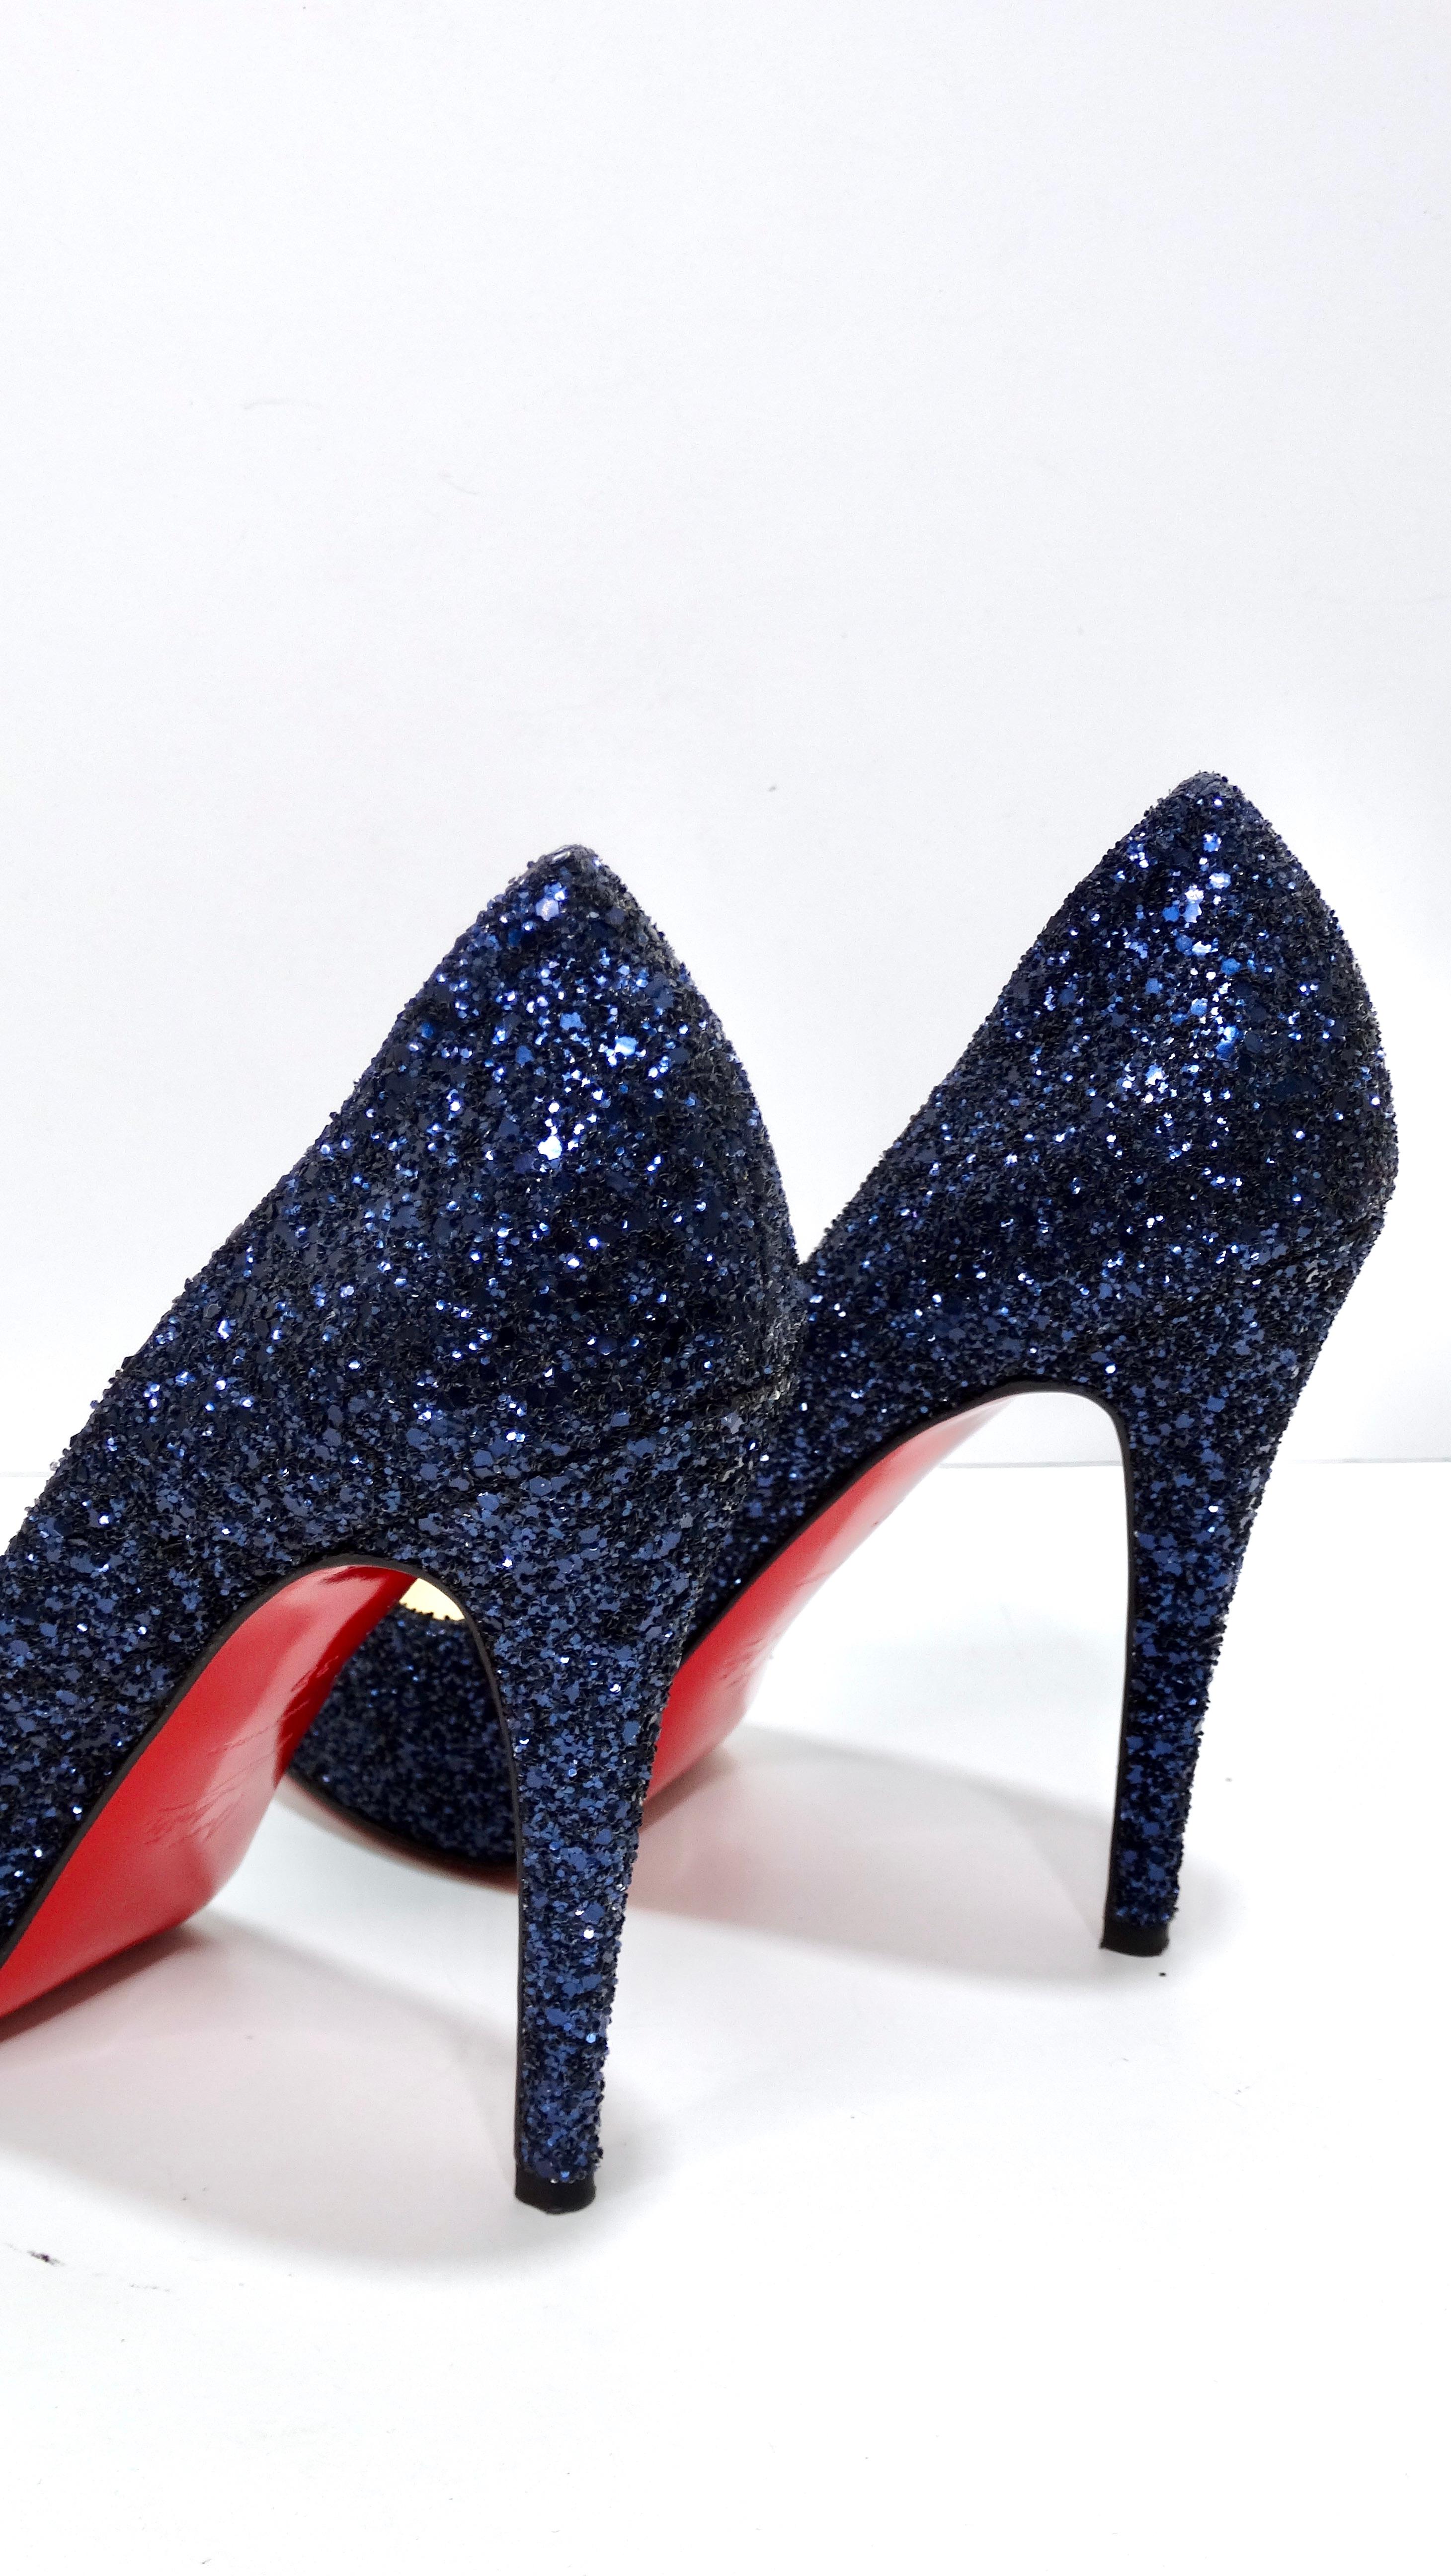 Christian Louboutin Blue Sequin Glitter Heels In Excellent Condition For Sale In Scottsdale, AZ